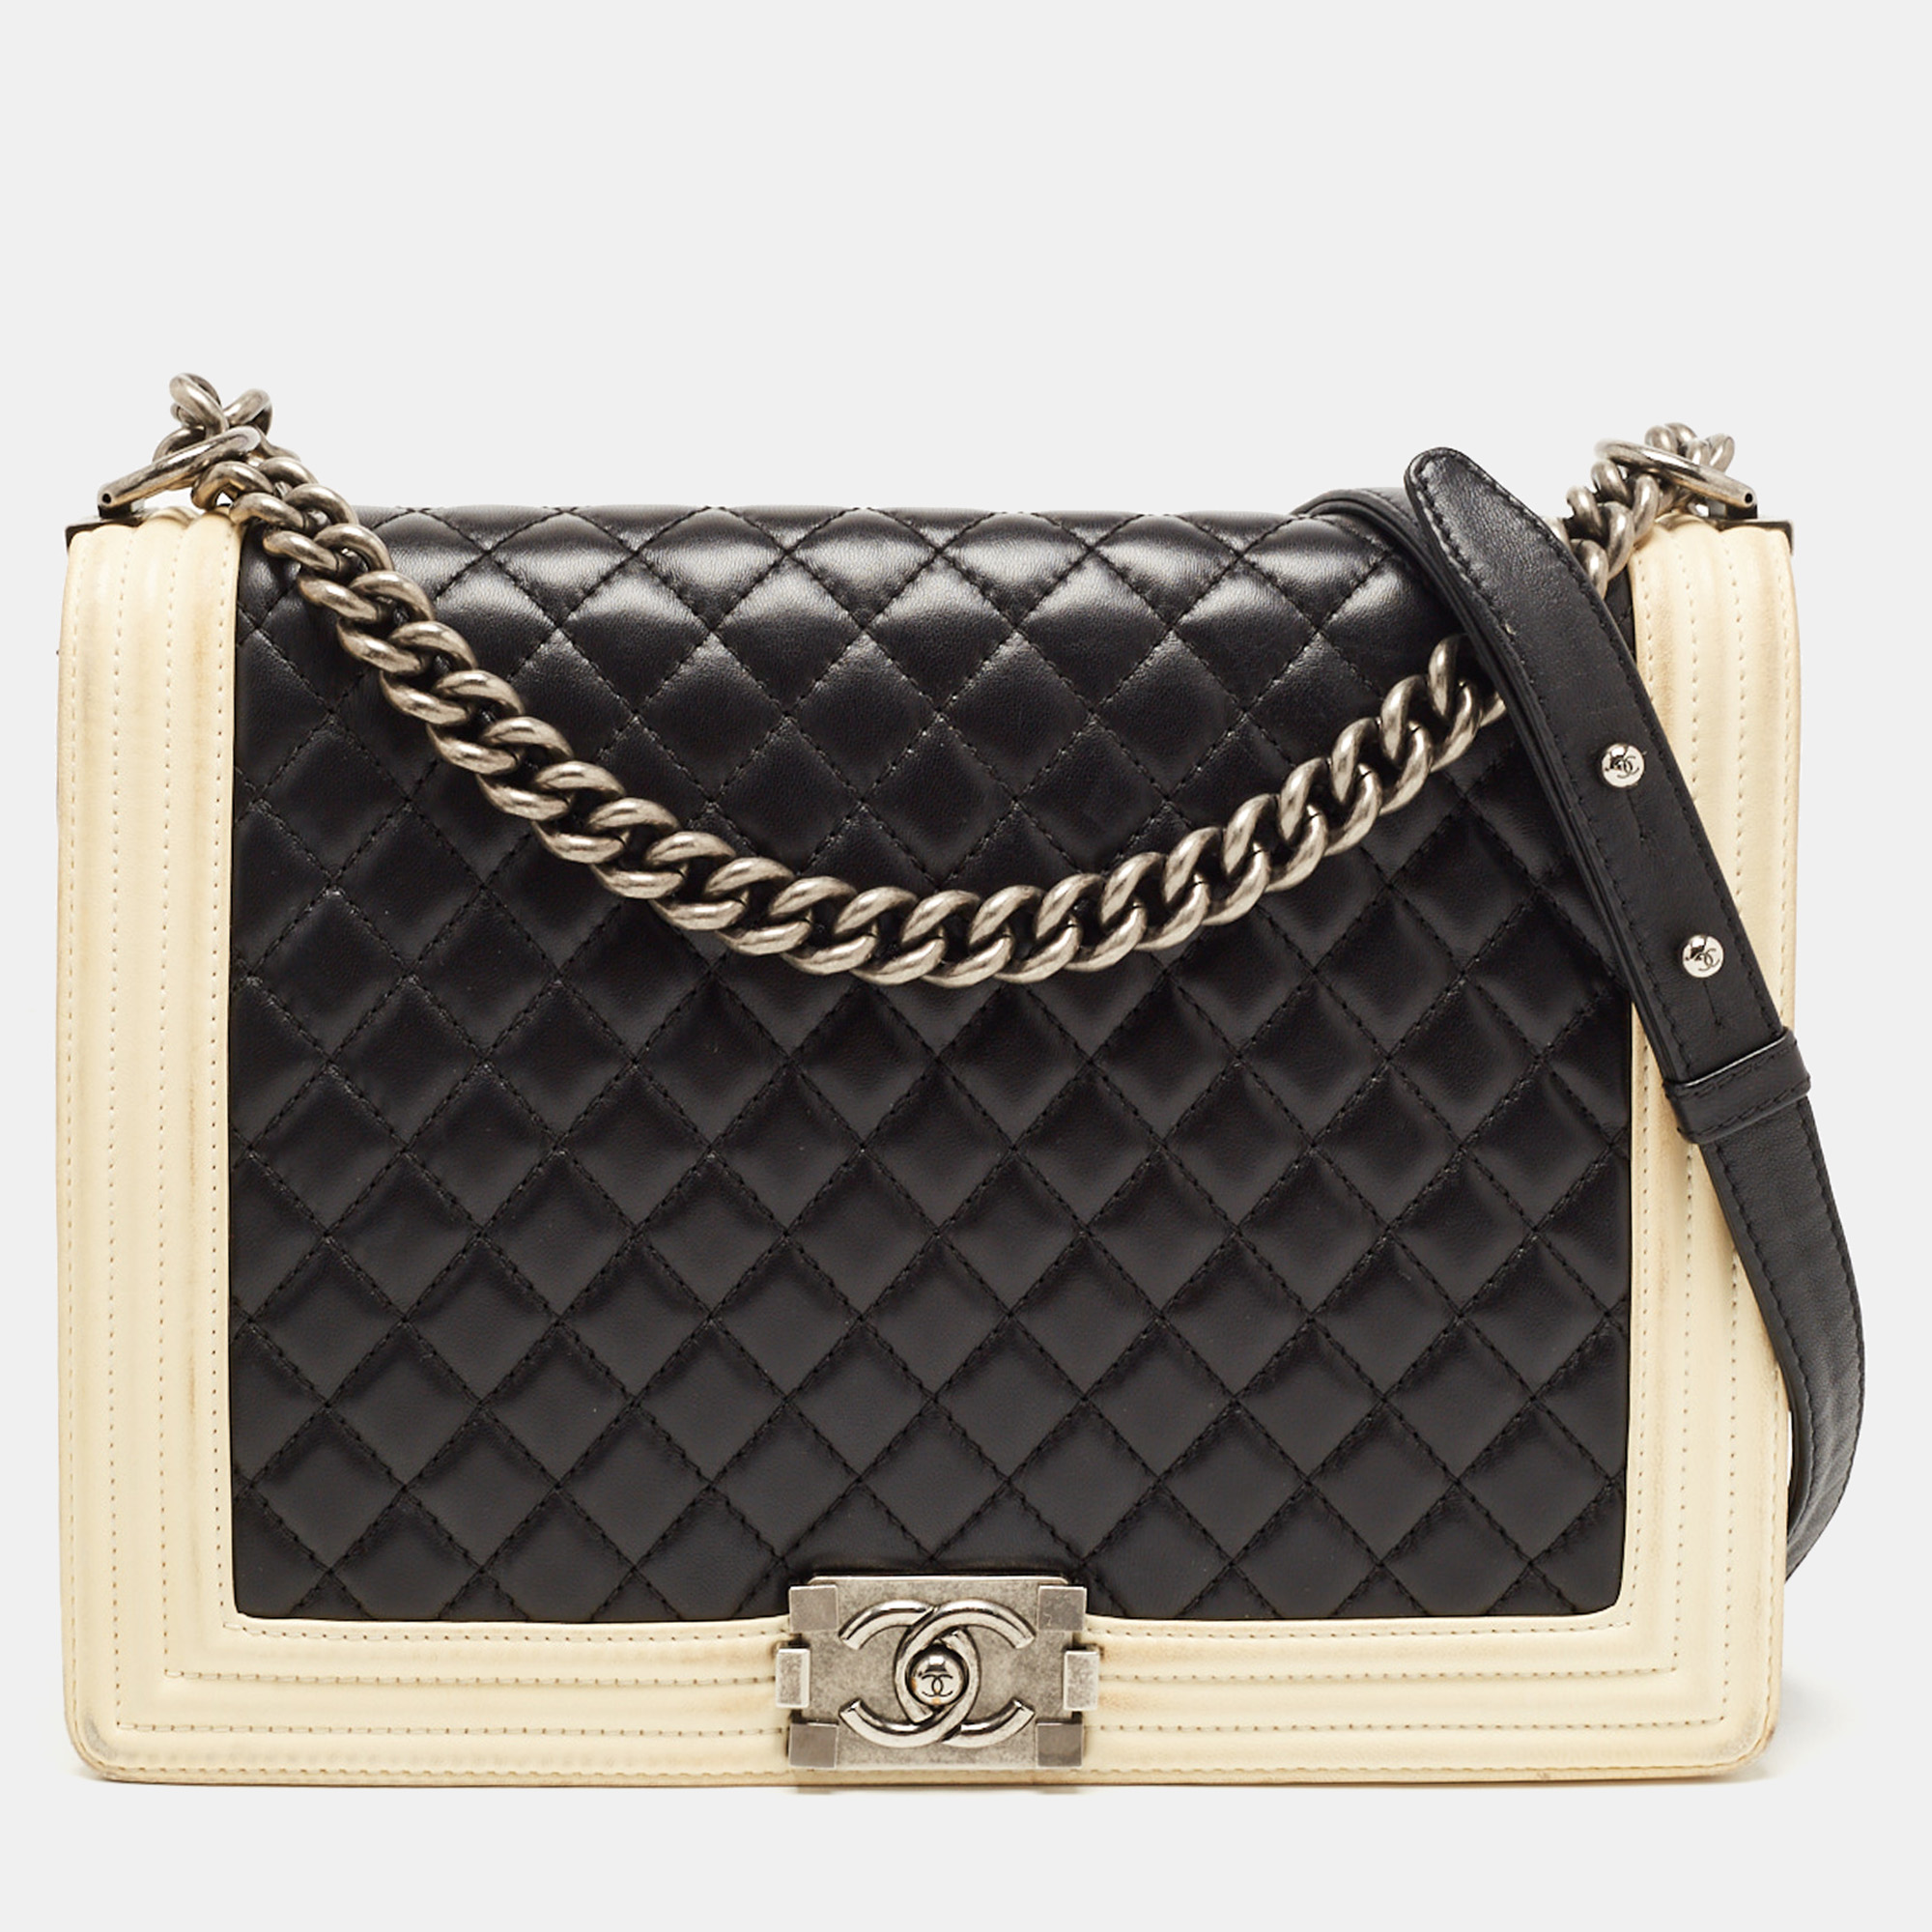 Pre-owned Chanel Black/cream Quilted Leather Large Boy Flap Bag